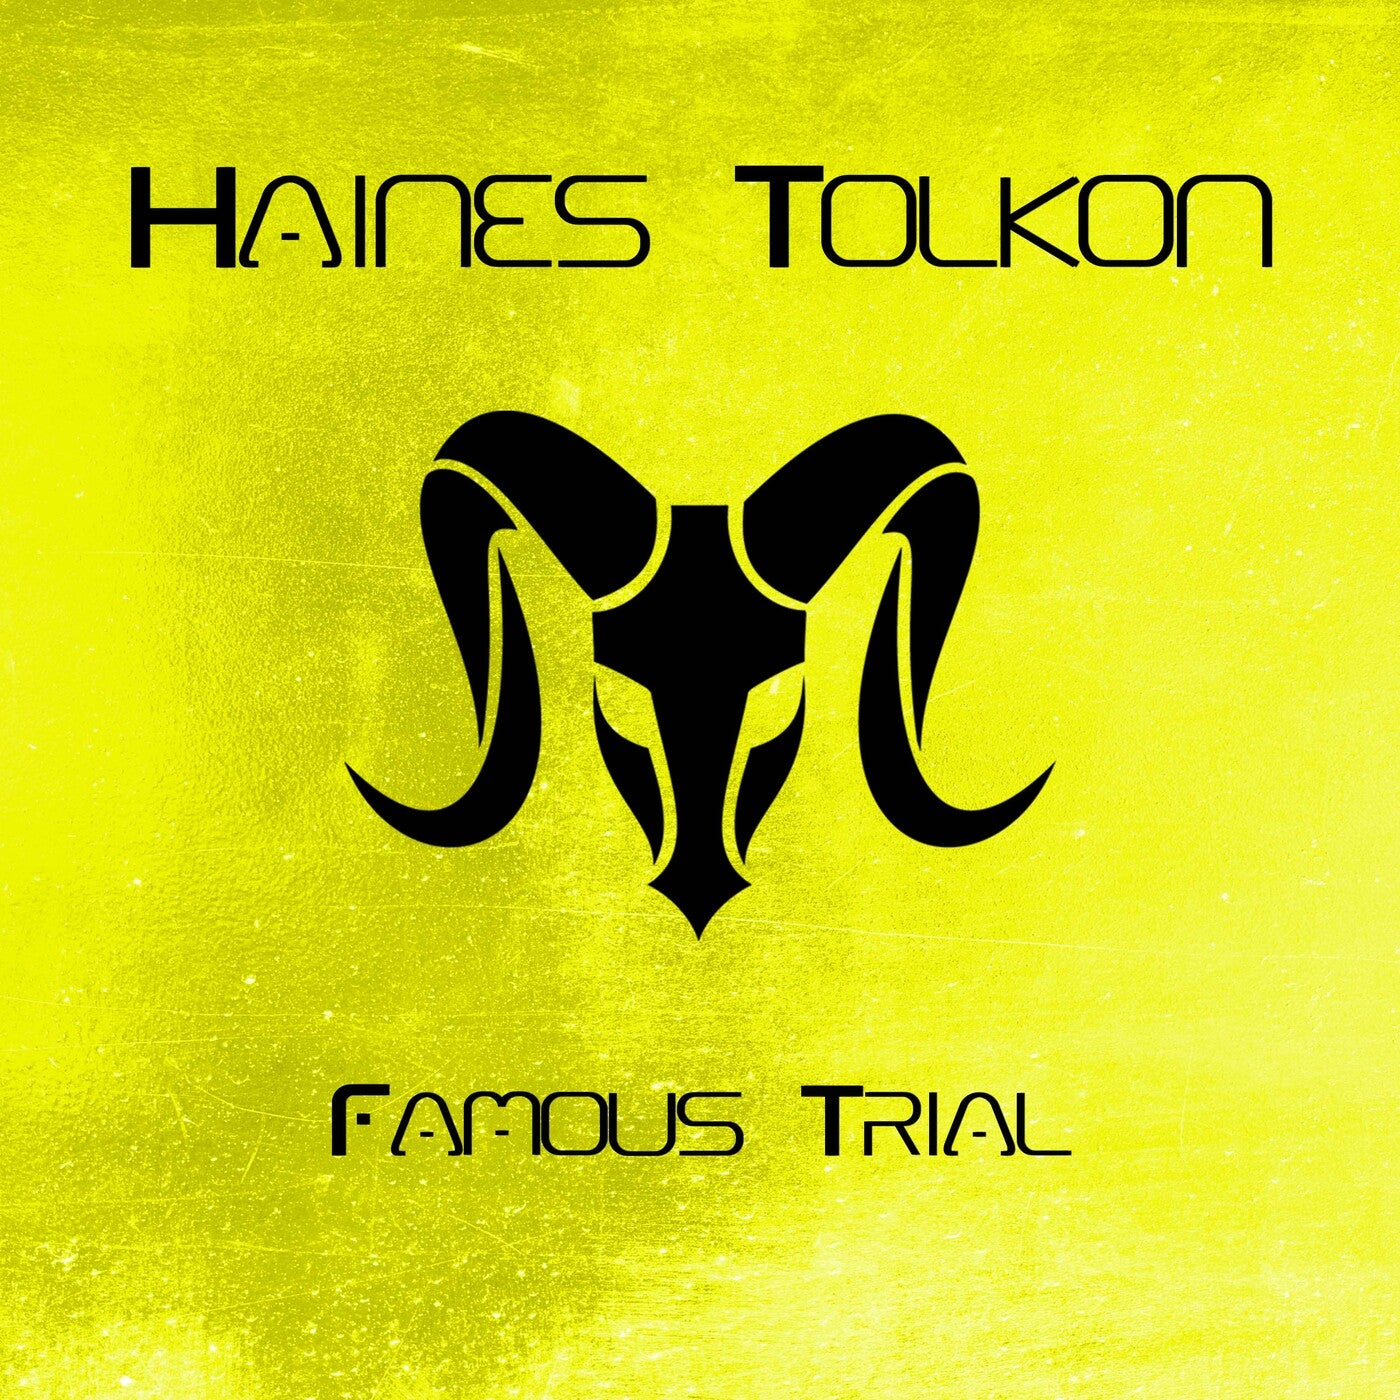 Famous Trial